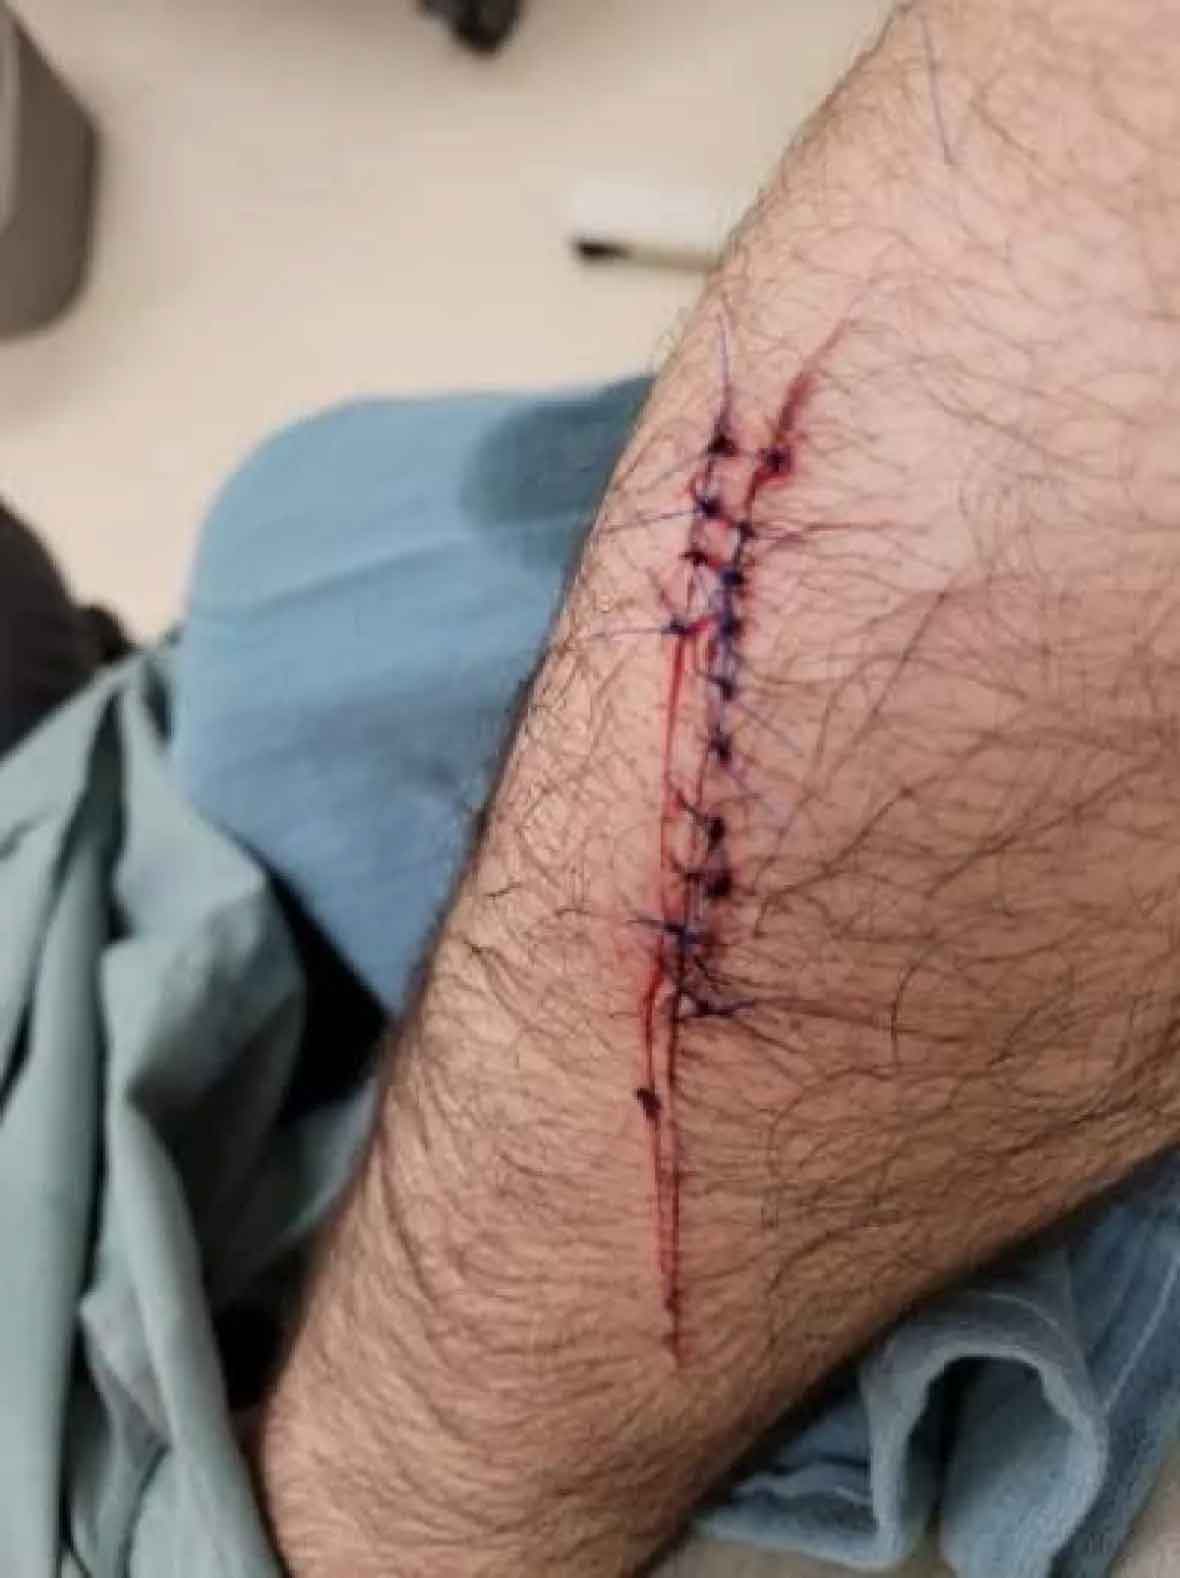 Muhammad Kashif needed 14 stitches to close a wound on his arm after an attack Friday morning in Saskatoon, Canada. — Photo courtesy CBC/Muhammad Kashif